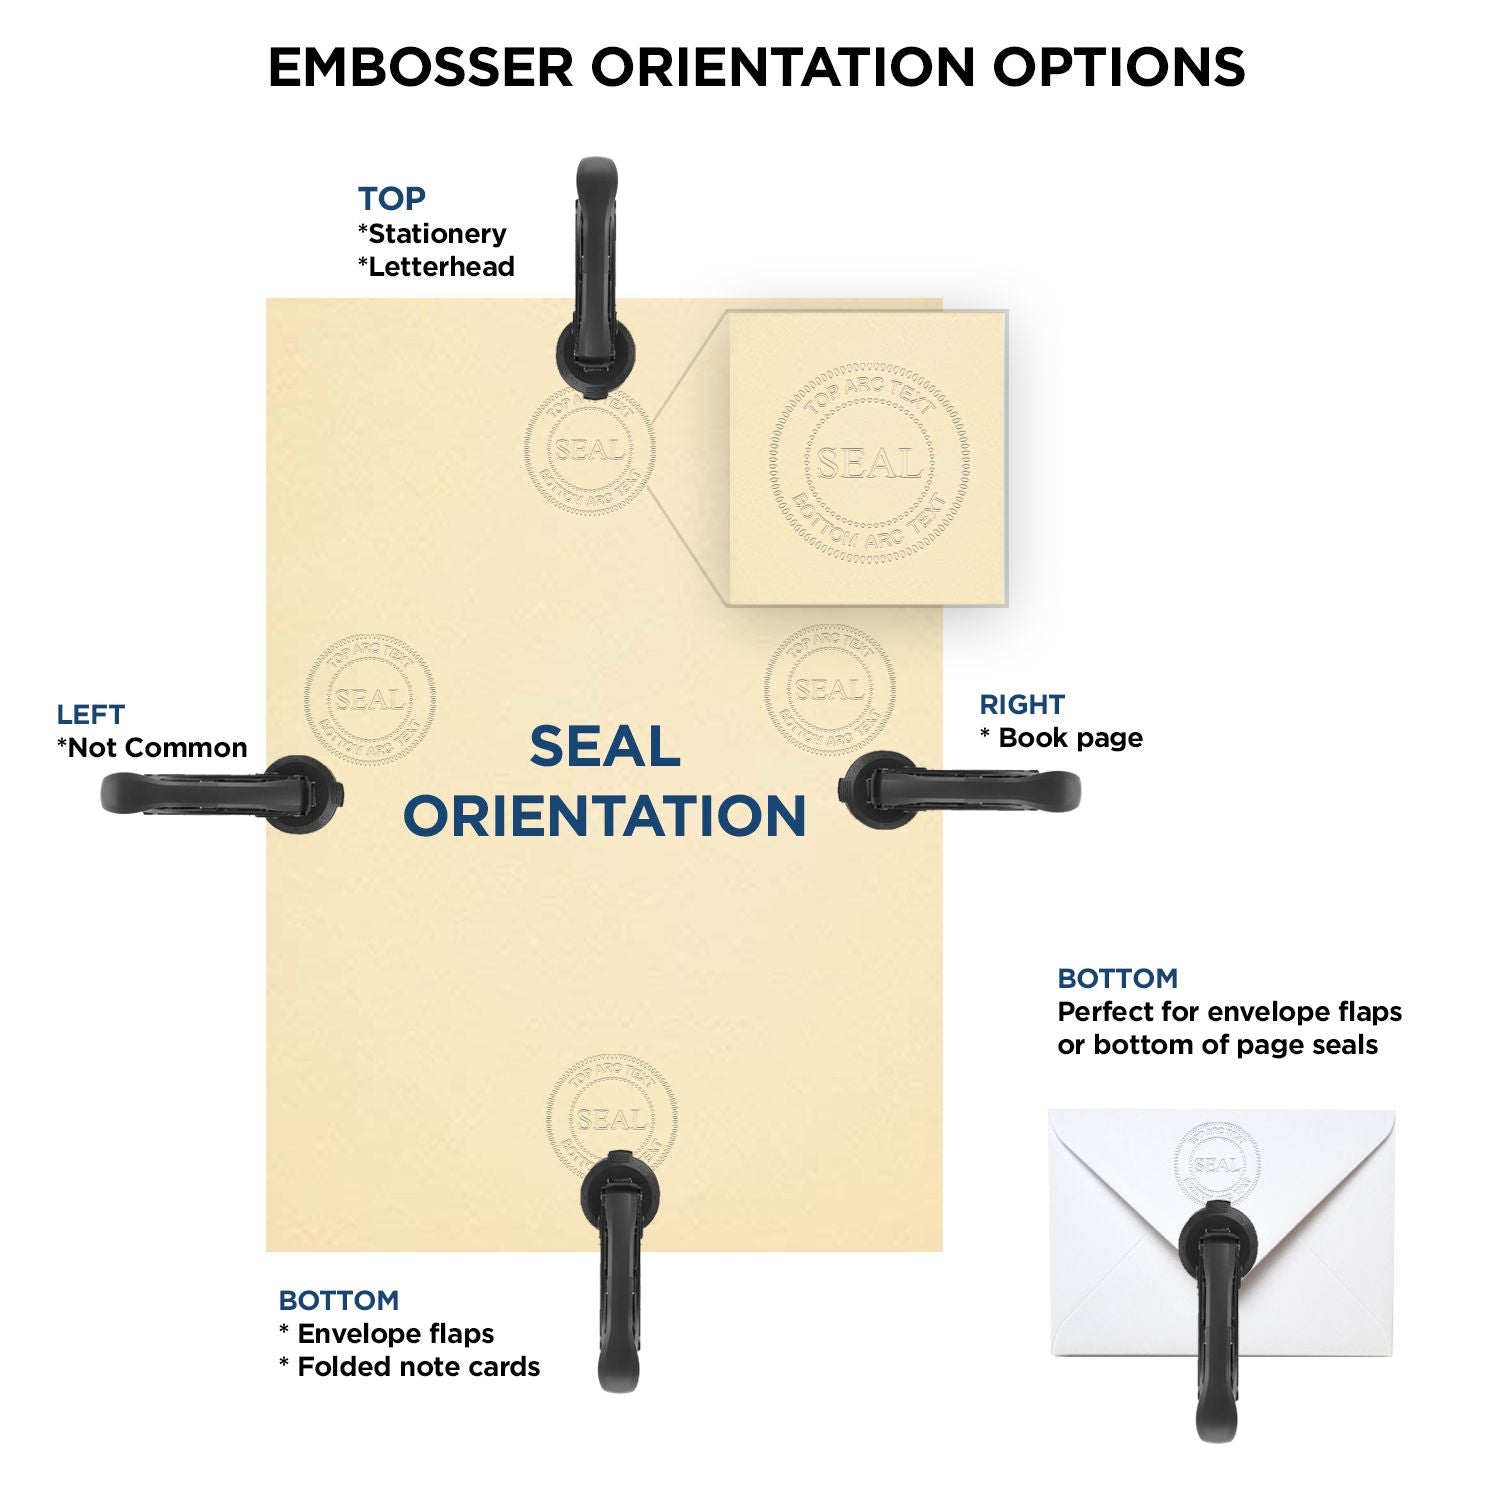 An infographic for the Handheld Tennessee Land Surveyor Seal showing embosser orientation, this is showing examples of a top, bottom, right and left insert.